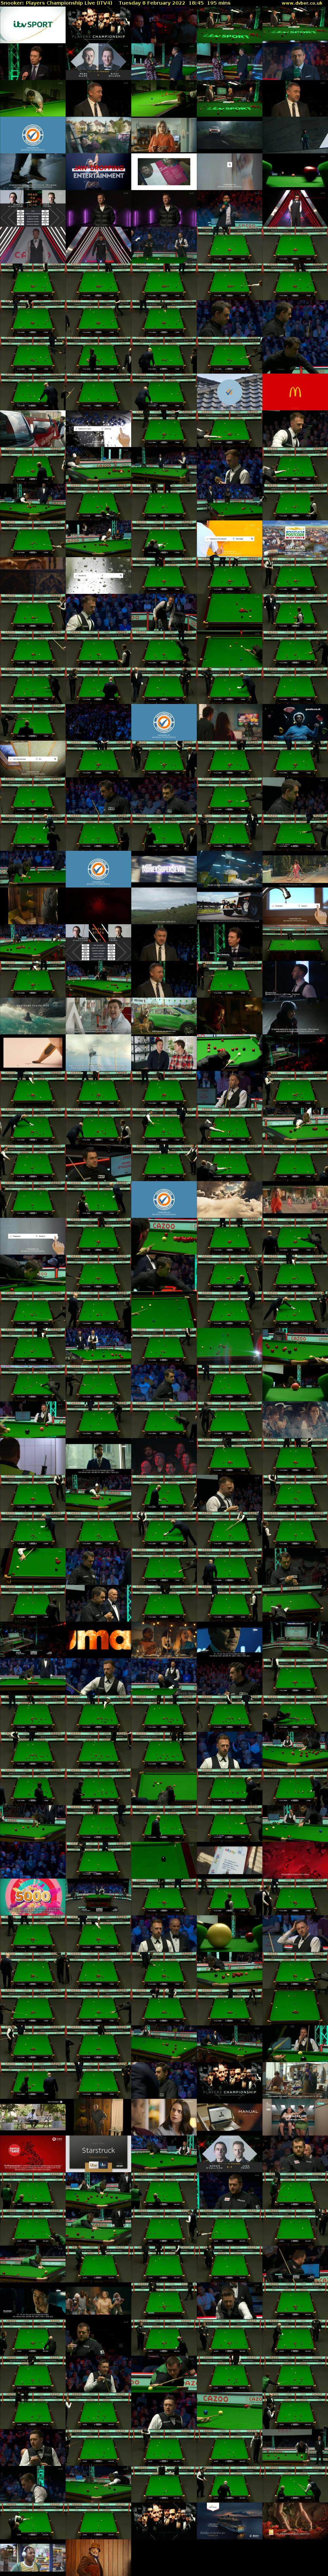 Snooker: Players Championship Live (ITV4) Tuesday 8 February 2022 18:45 - 22:00